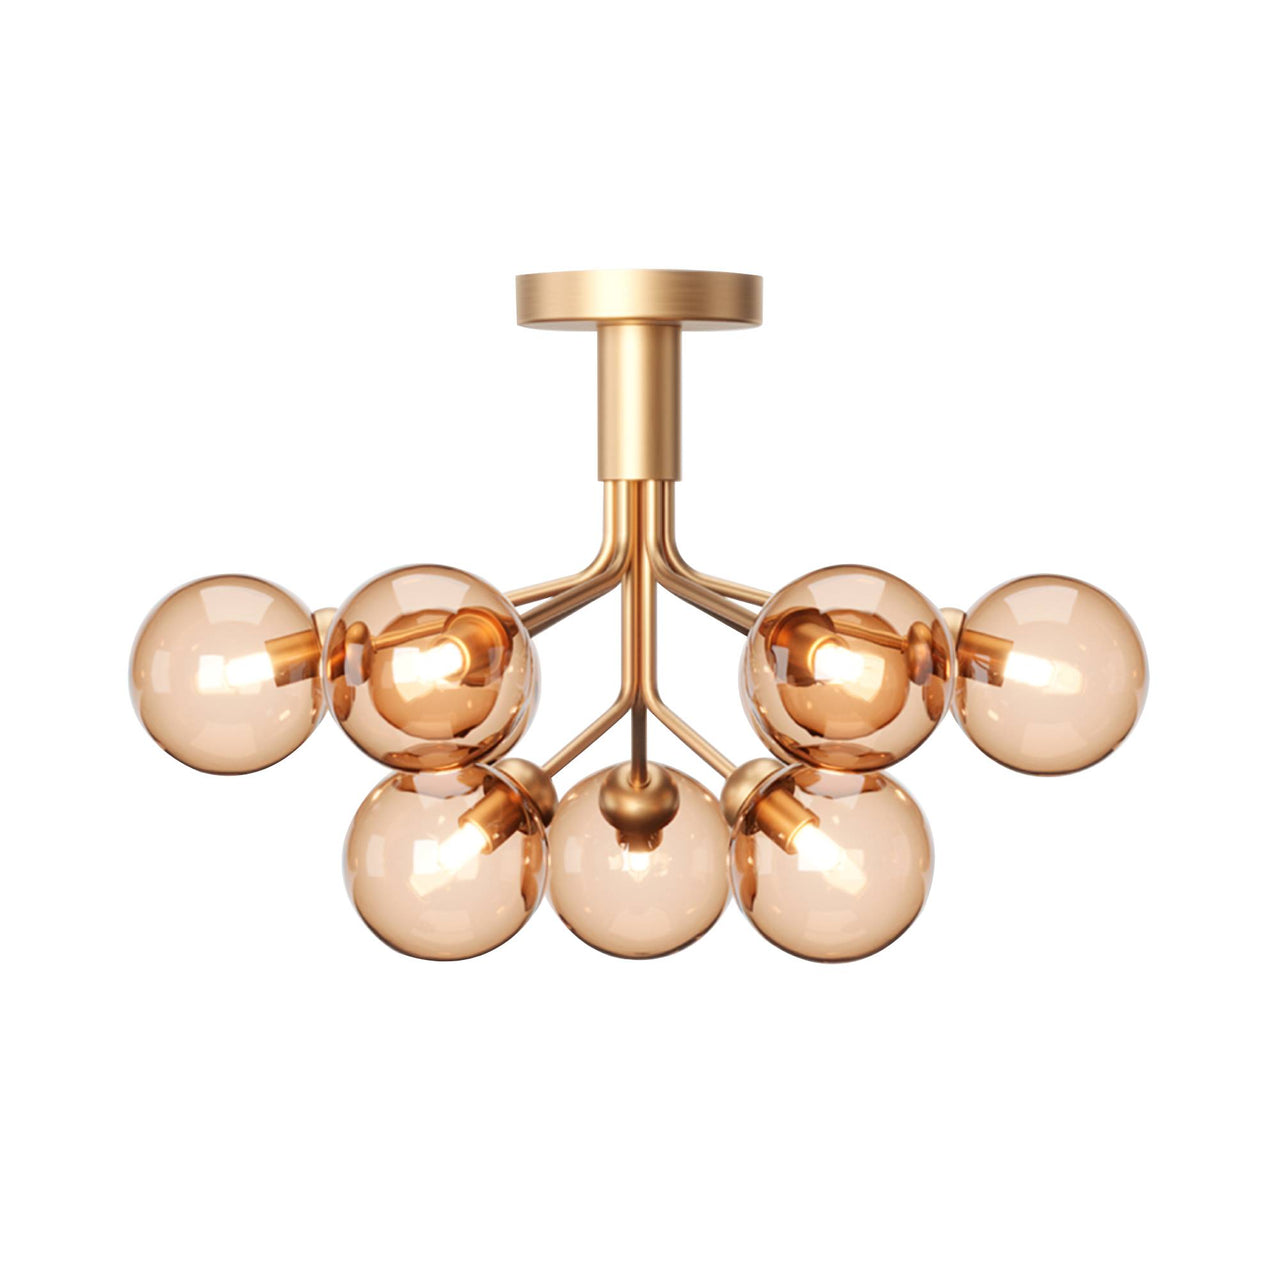 Apiales 9 Ceiling: Brushed Brass + Optic Gold